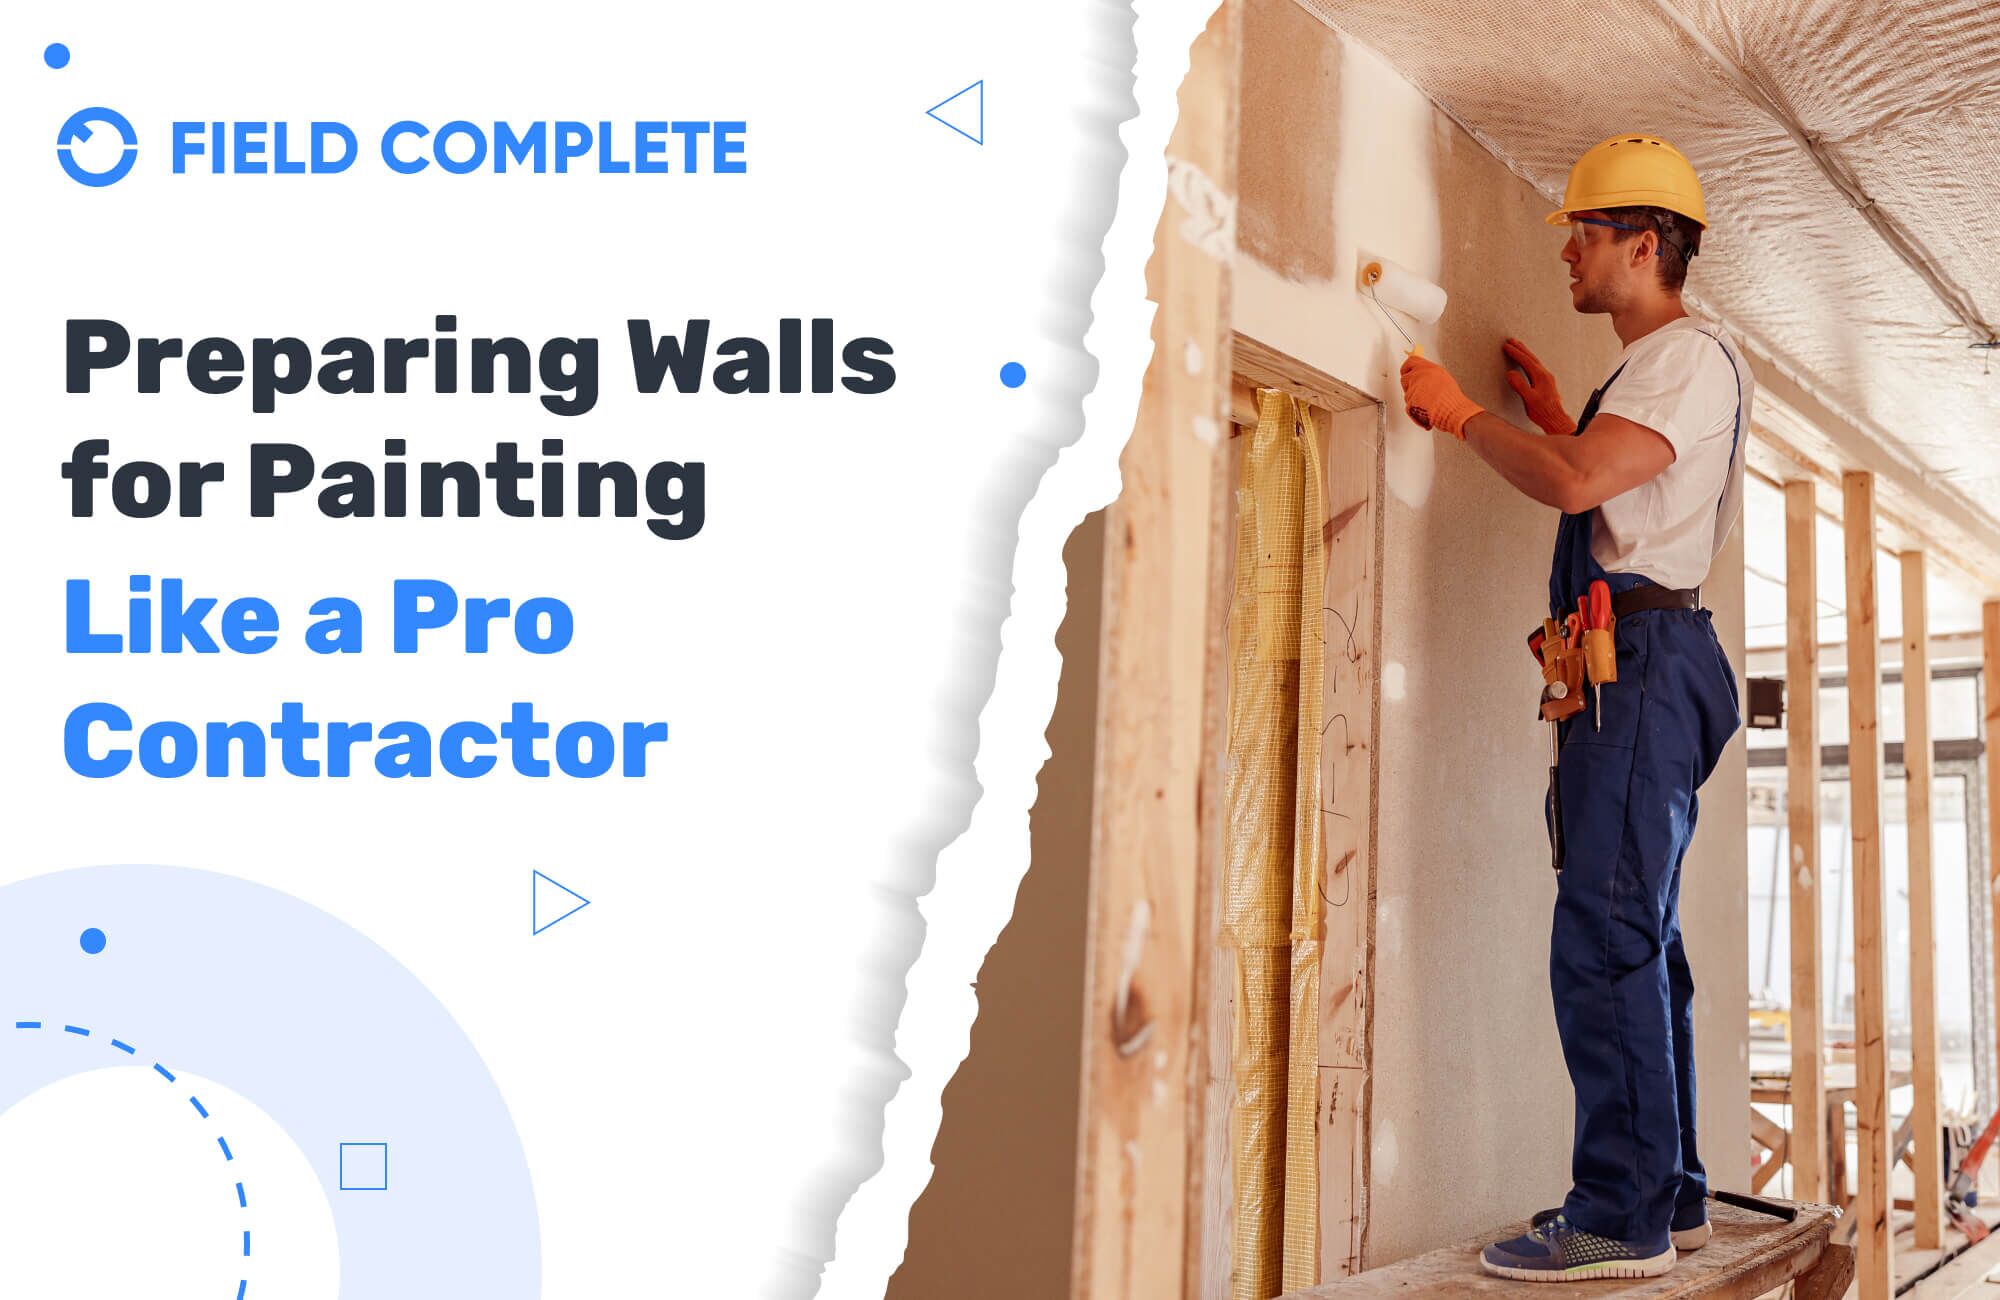 Step-by-Step: Preparing Walls for Painting like a Pro Contractor